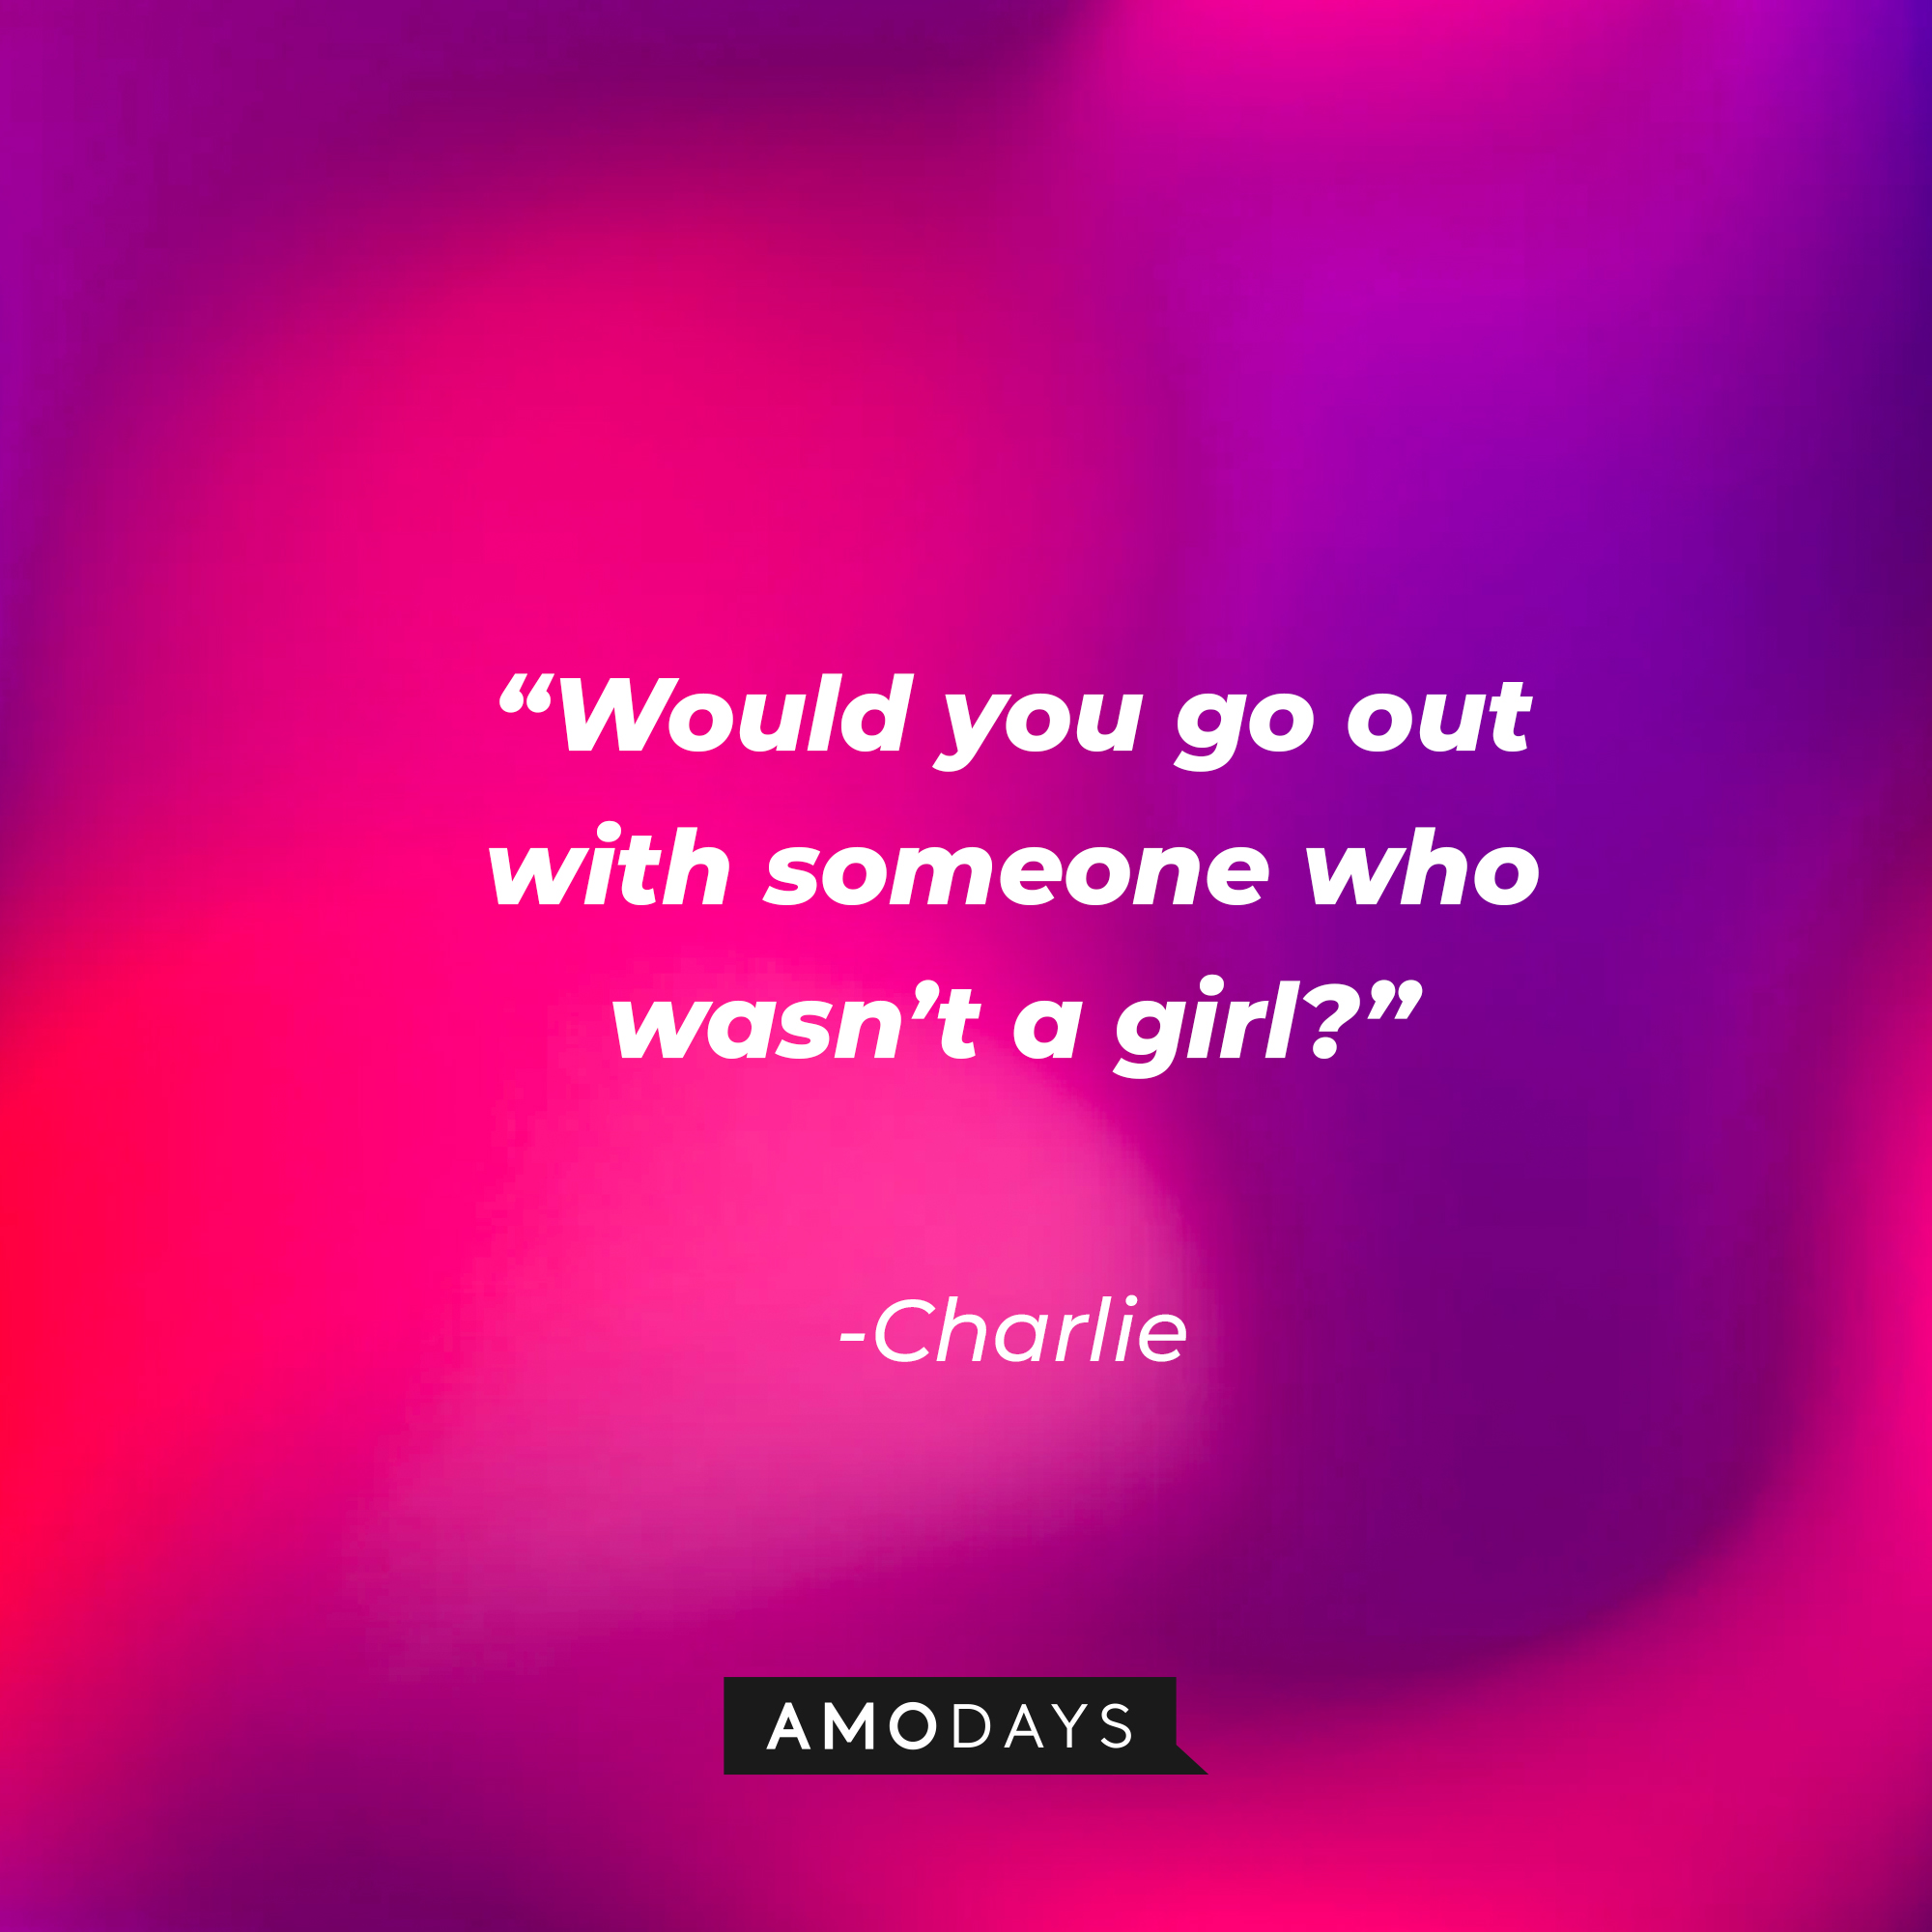 Charlie’s quote: “Would you go out with someone who wasn’t a girl?” | Source: AmoDays